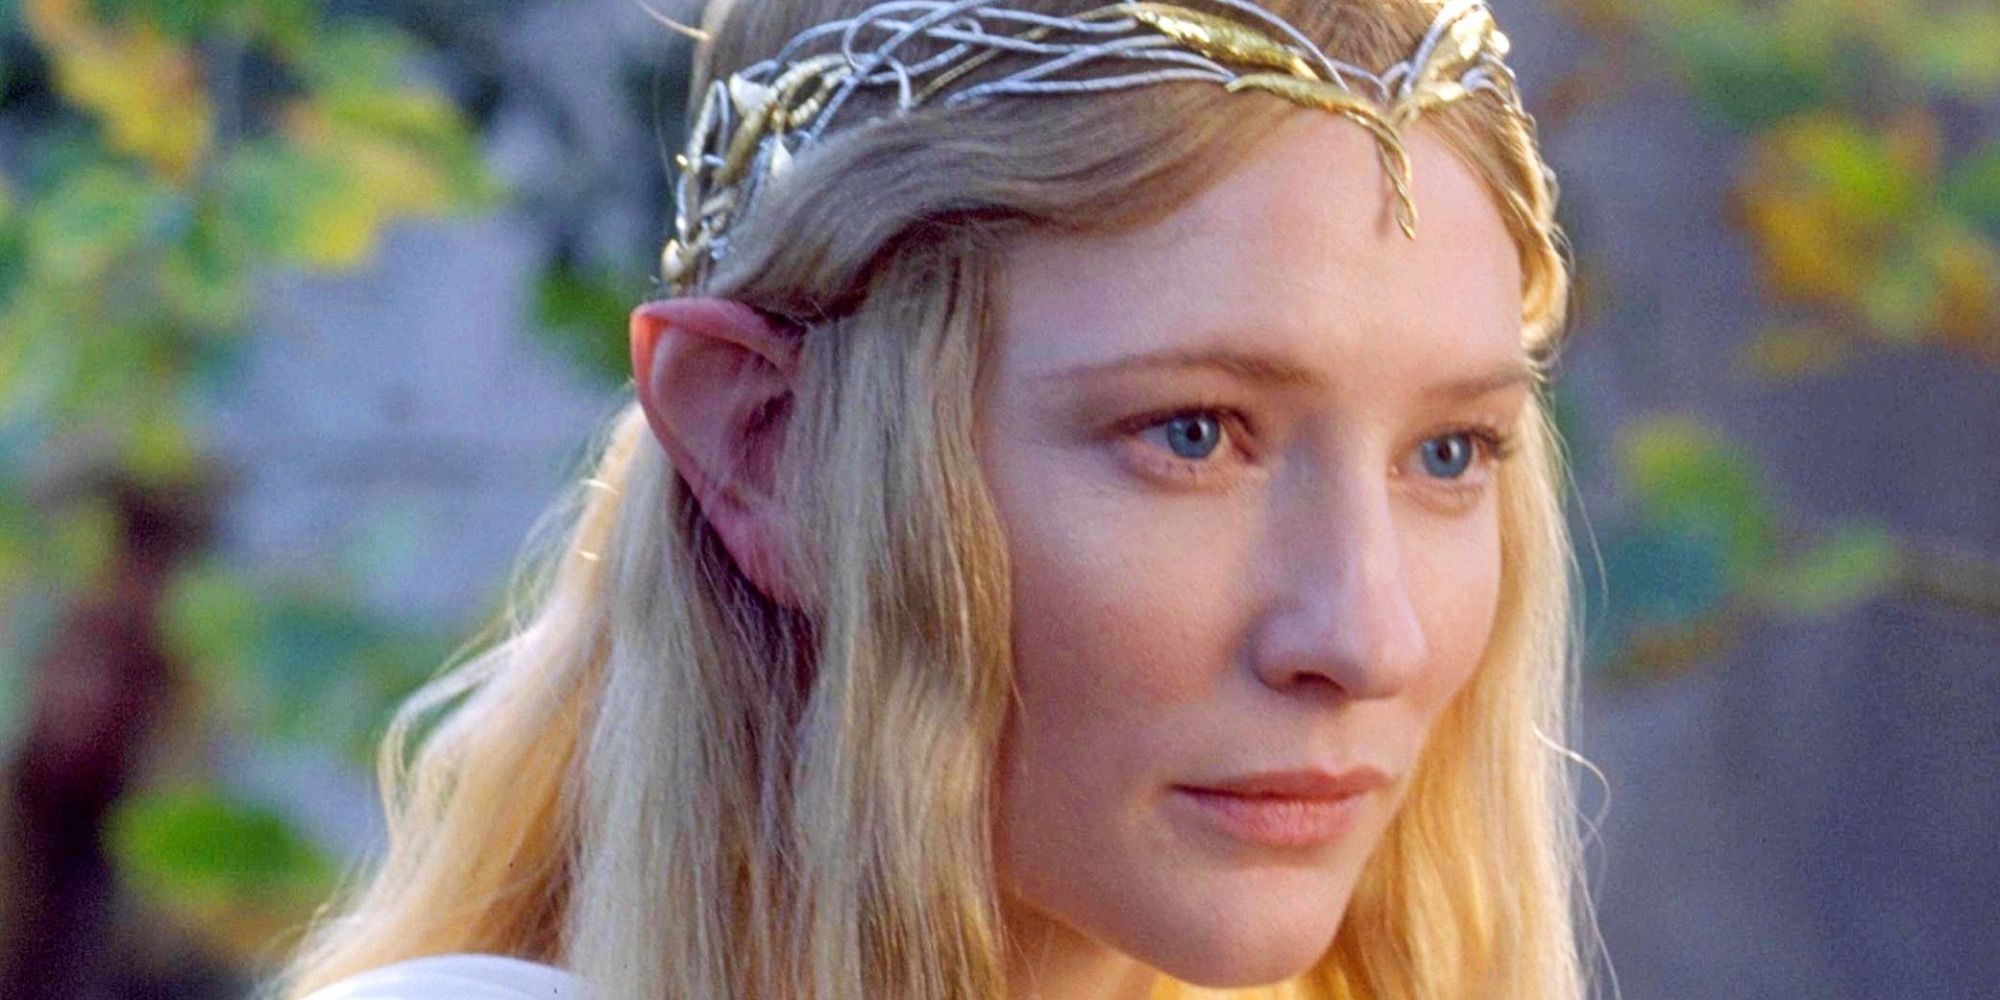 Cate Blanchett as Galadriel gifts the Fellowship individual gifts in Lord of the Rings: The Fellowship of the Ring